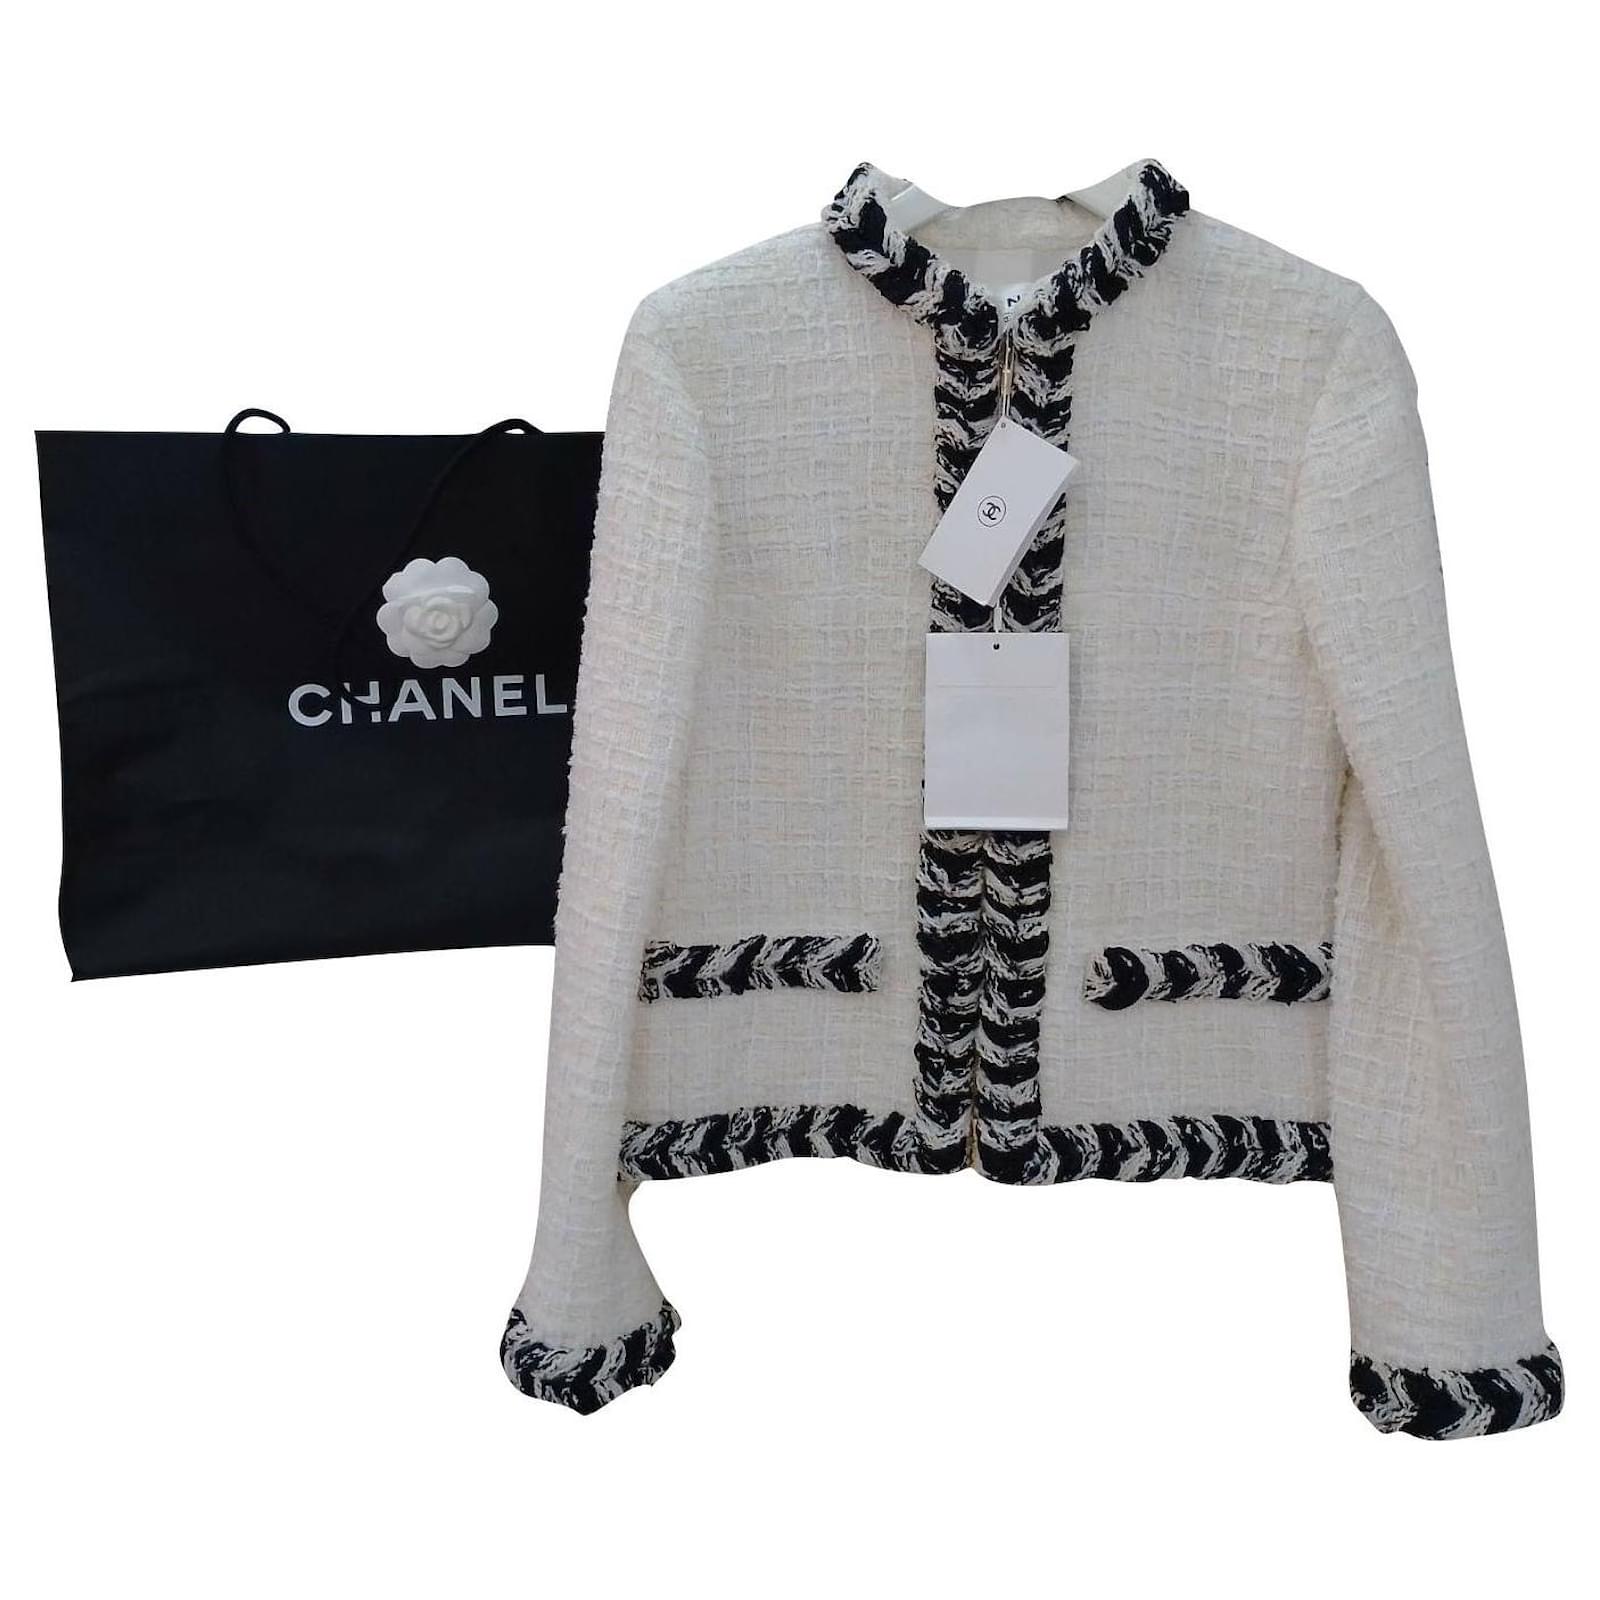 Cambon chanel#blazer#jacket#tuvit#with invoice#label#38#m#french